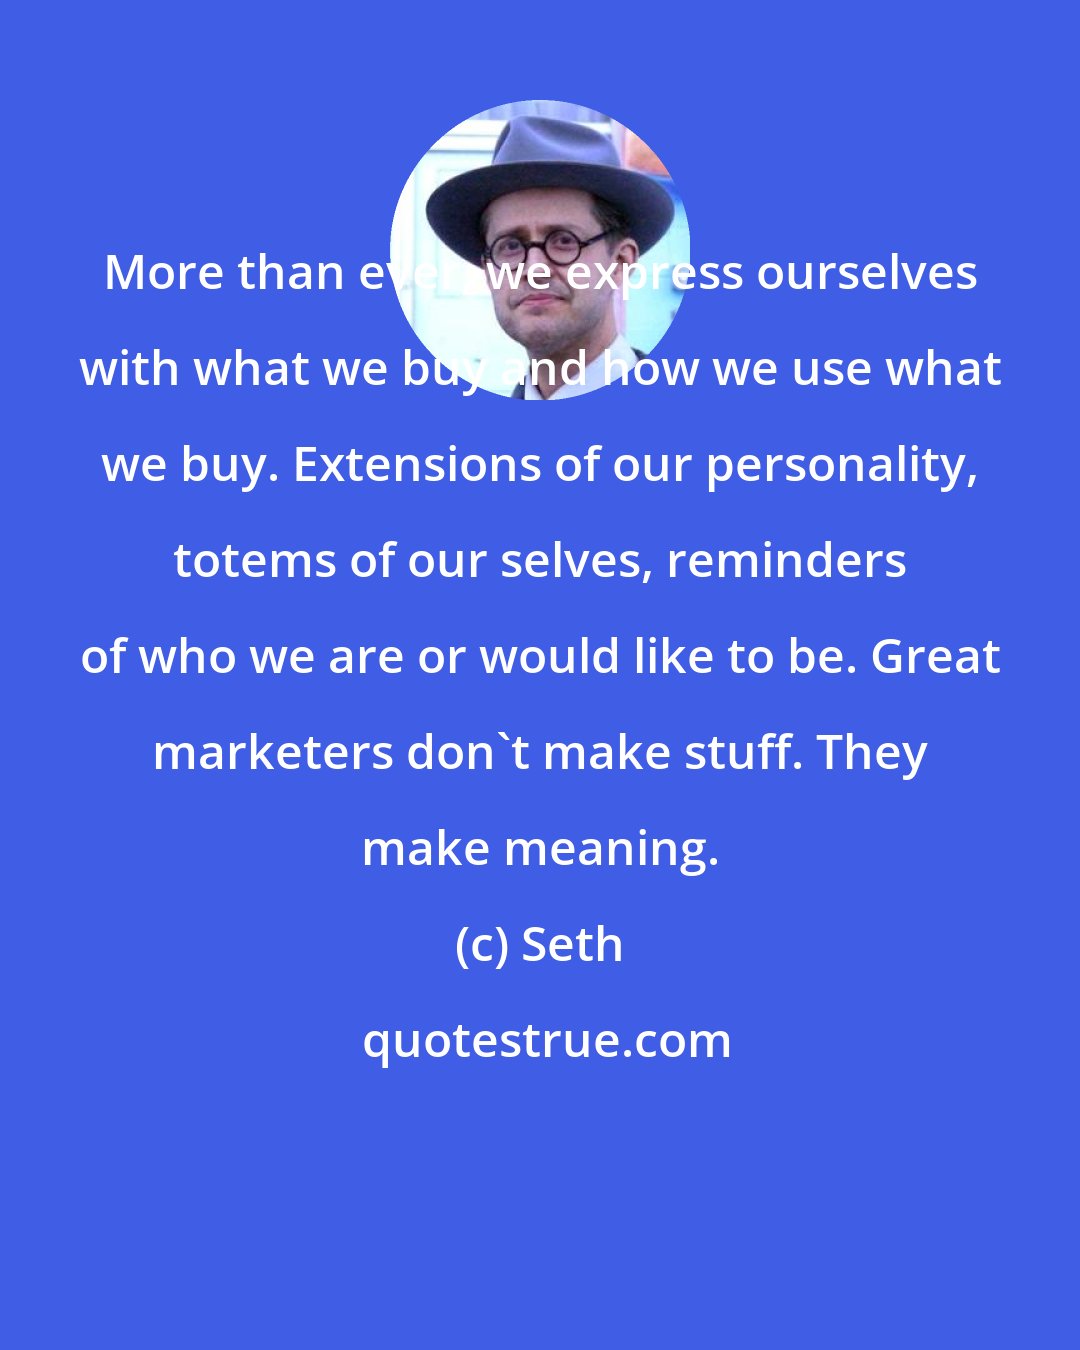 Seth: More than ever, we express ourselves with what we buy and how we use what we buy. Extensions of our personality, totems of our selves, reminders of who we are or would like to be. Great marketers don't make stuff. They make meaning.